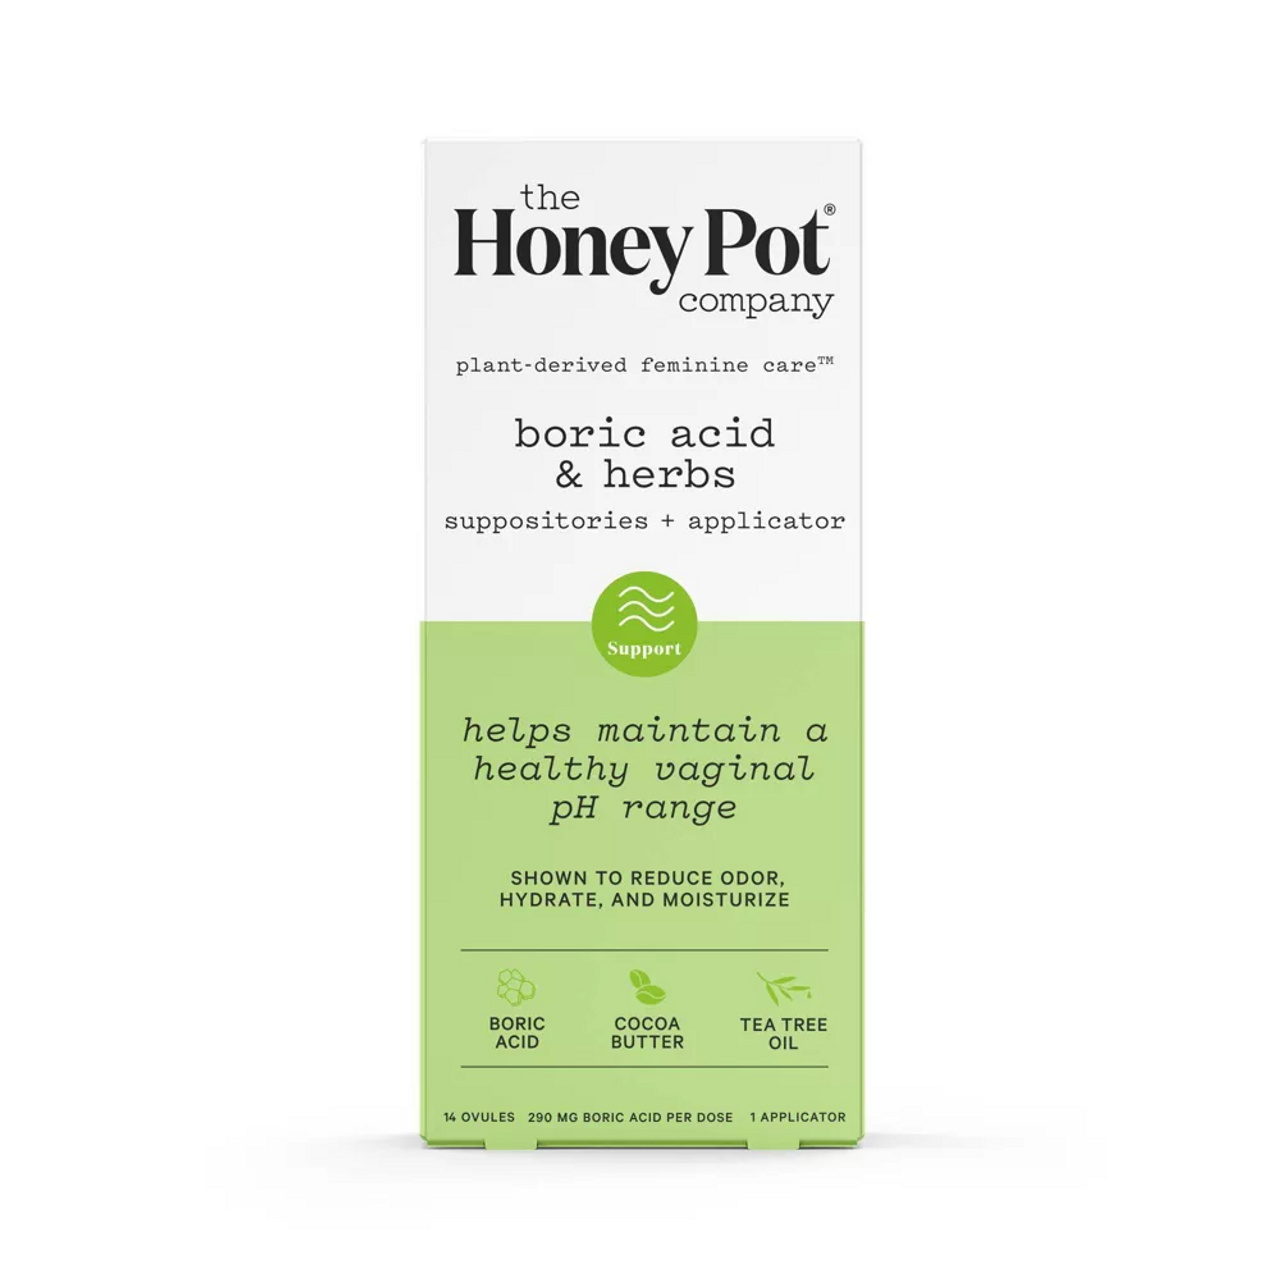 The Honey Pot Company Boric Acid and Herbs Suppositories plus Applicator, 14 Ea